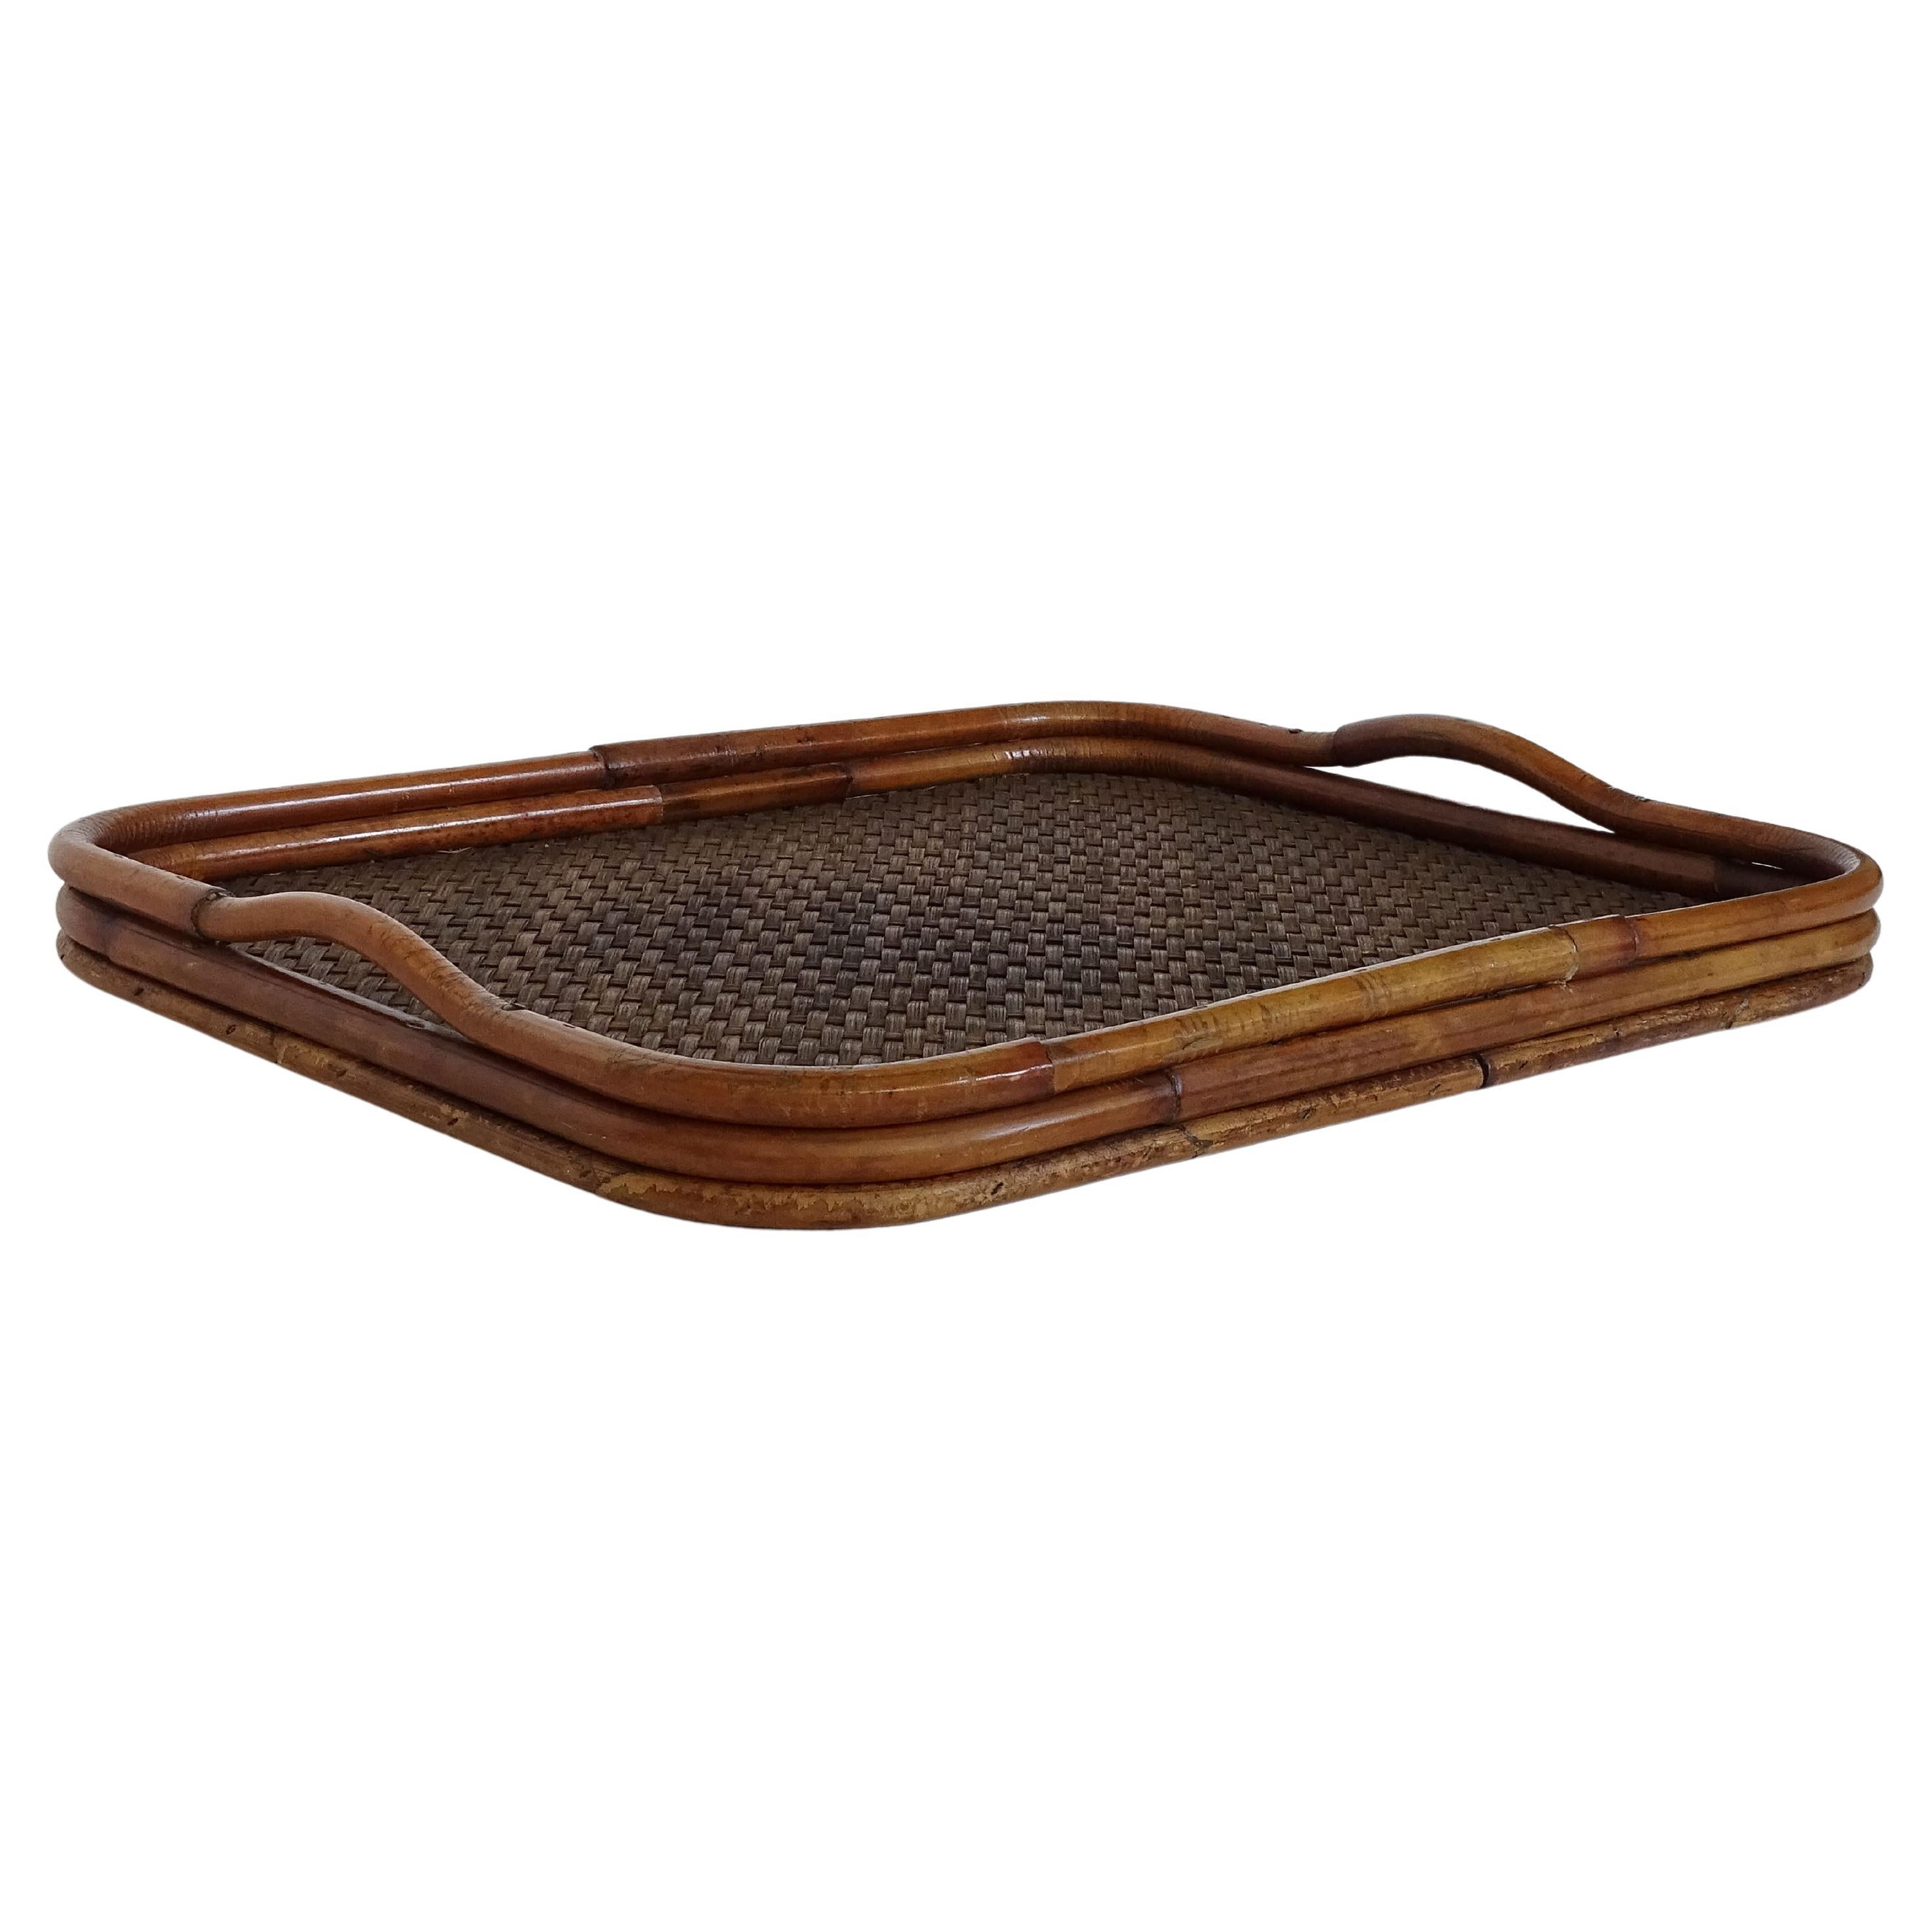 Gabriella Crespi Bamboo and Rattan Large Serving Tray, Italy, 1970s